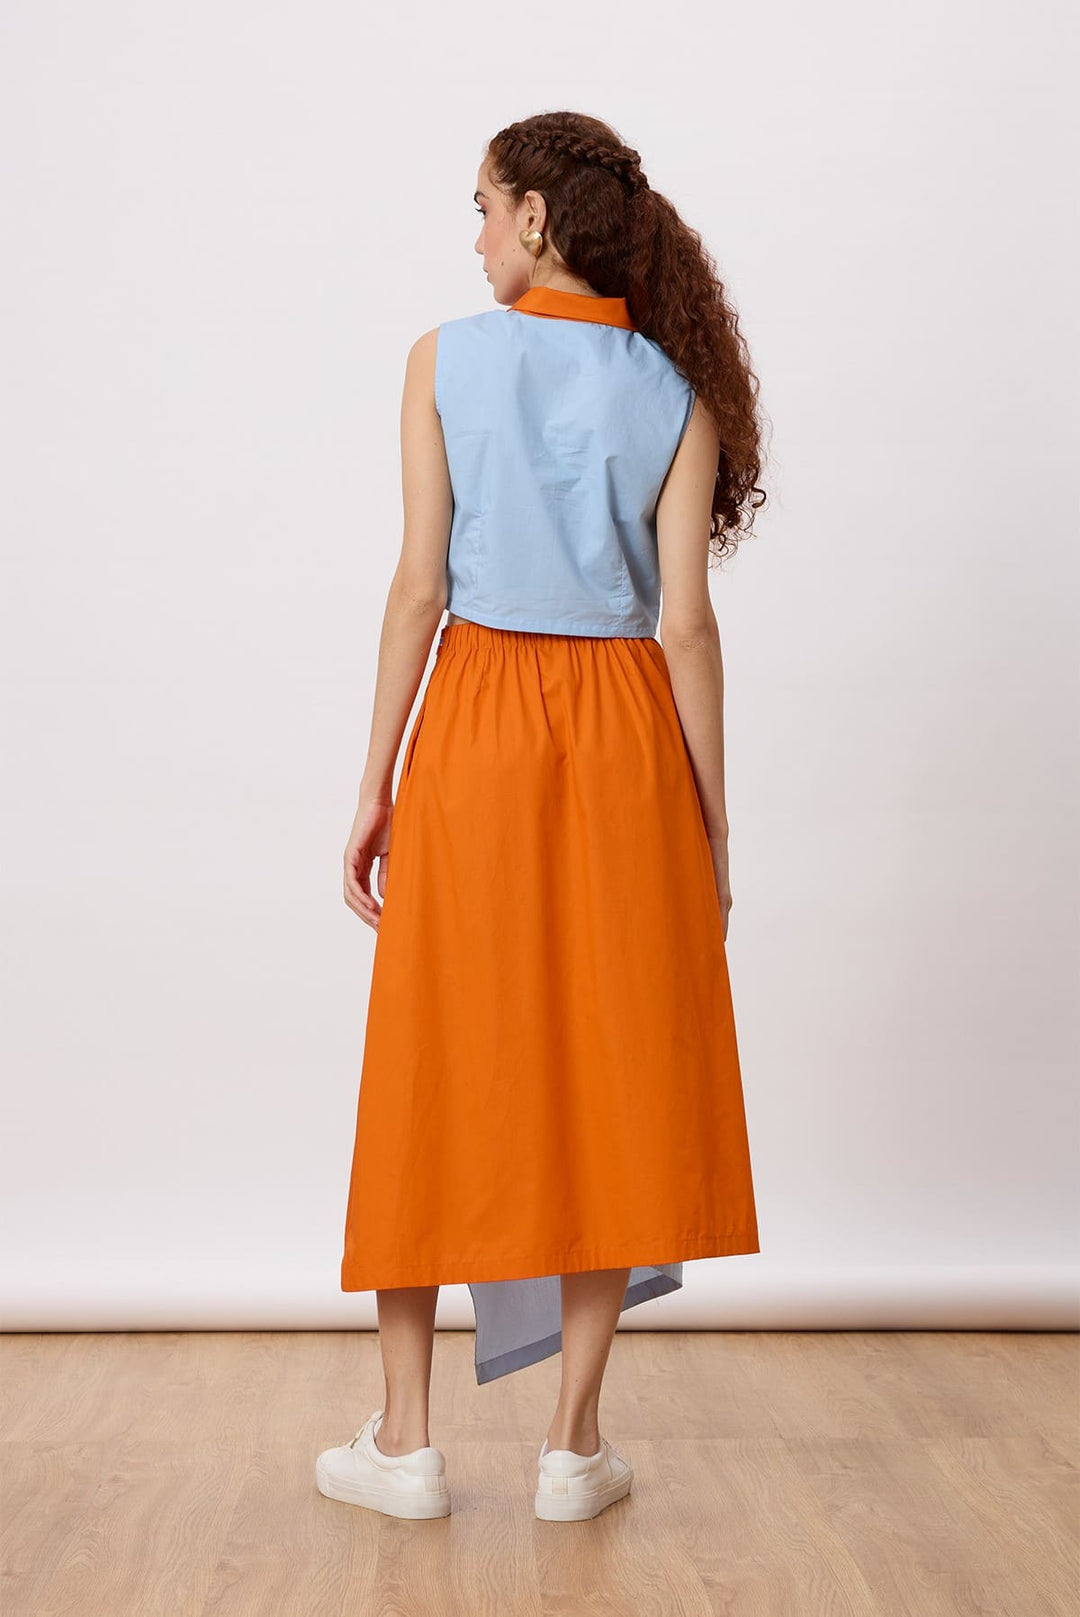 Harper Sleeveless Top boxy crop top with a with a contrast collar.